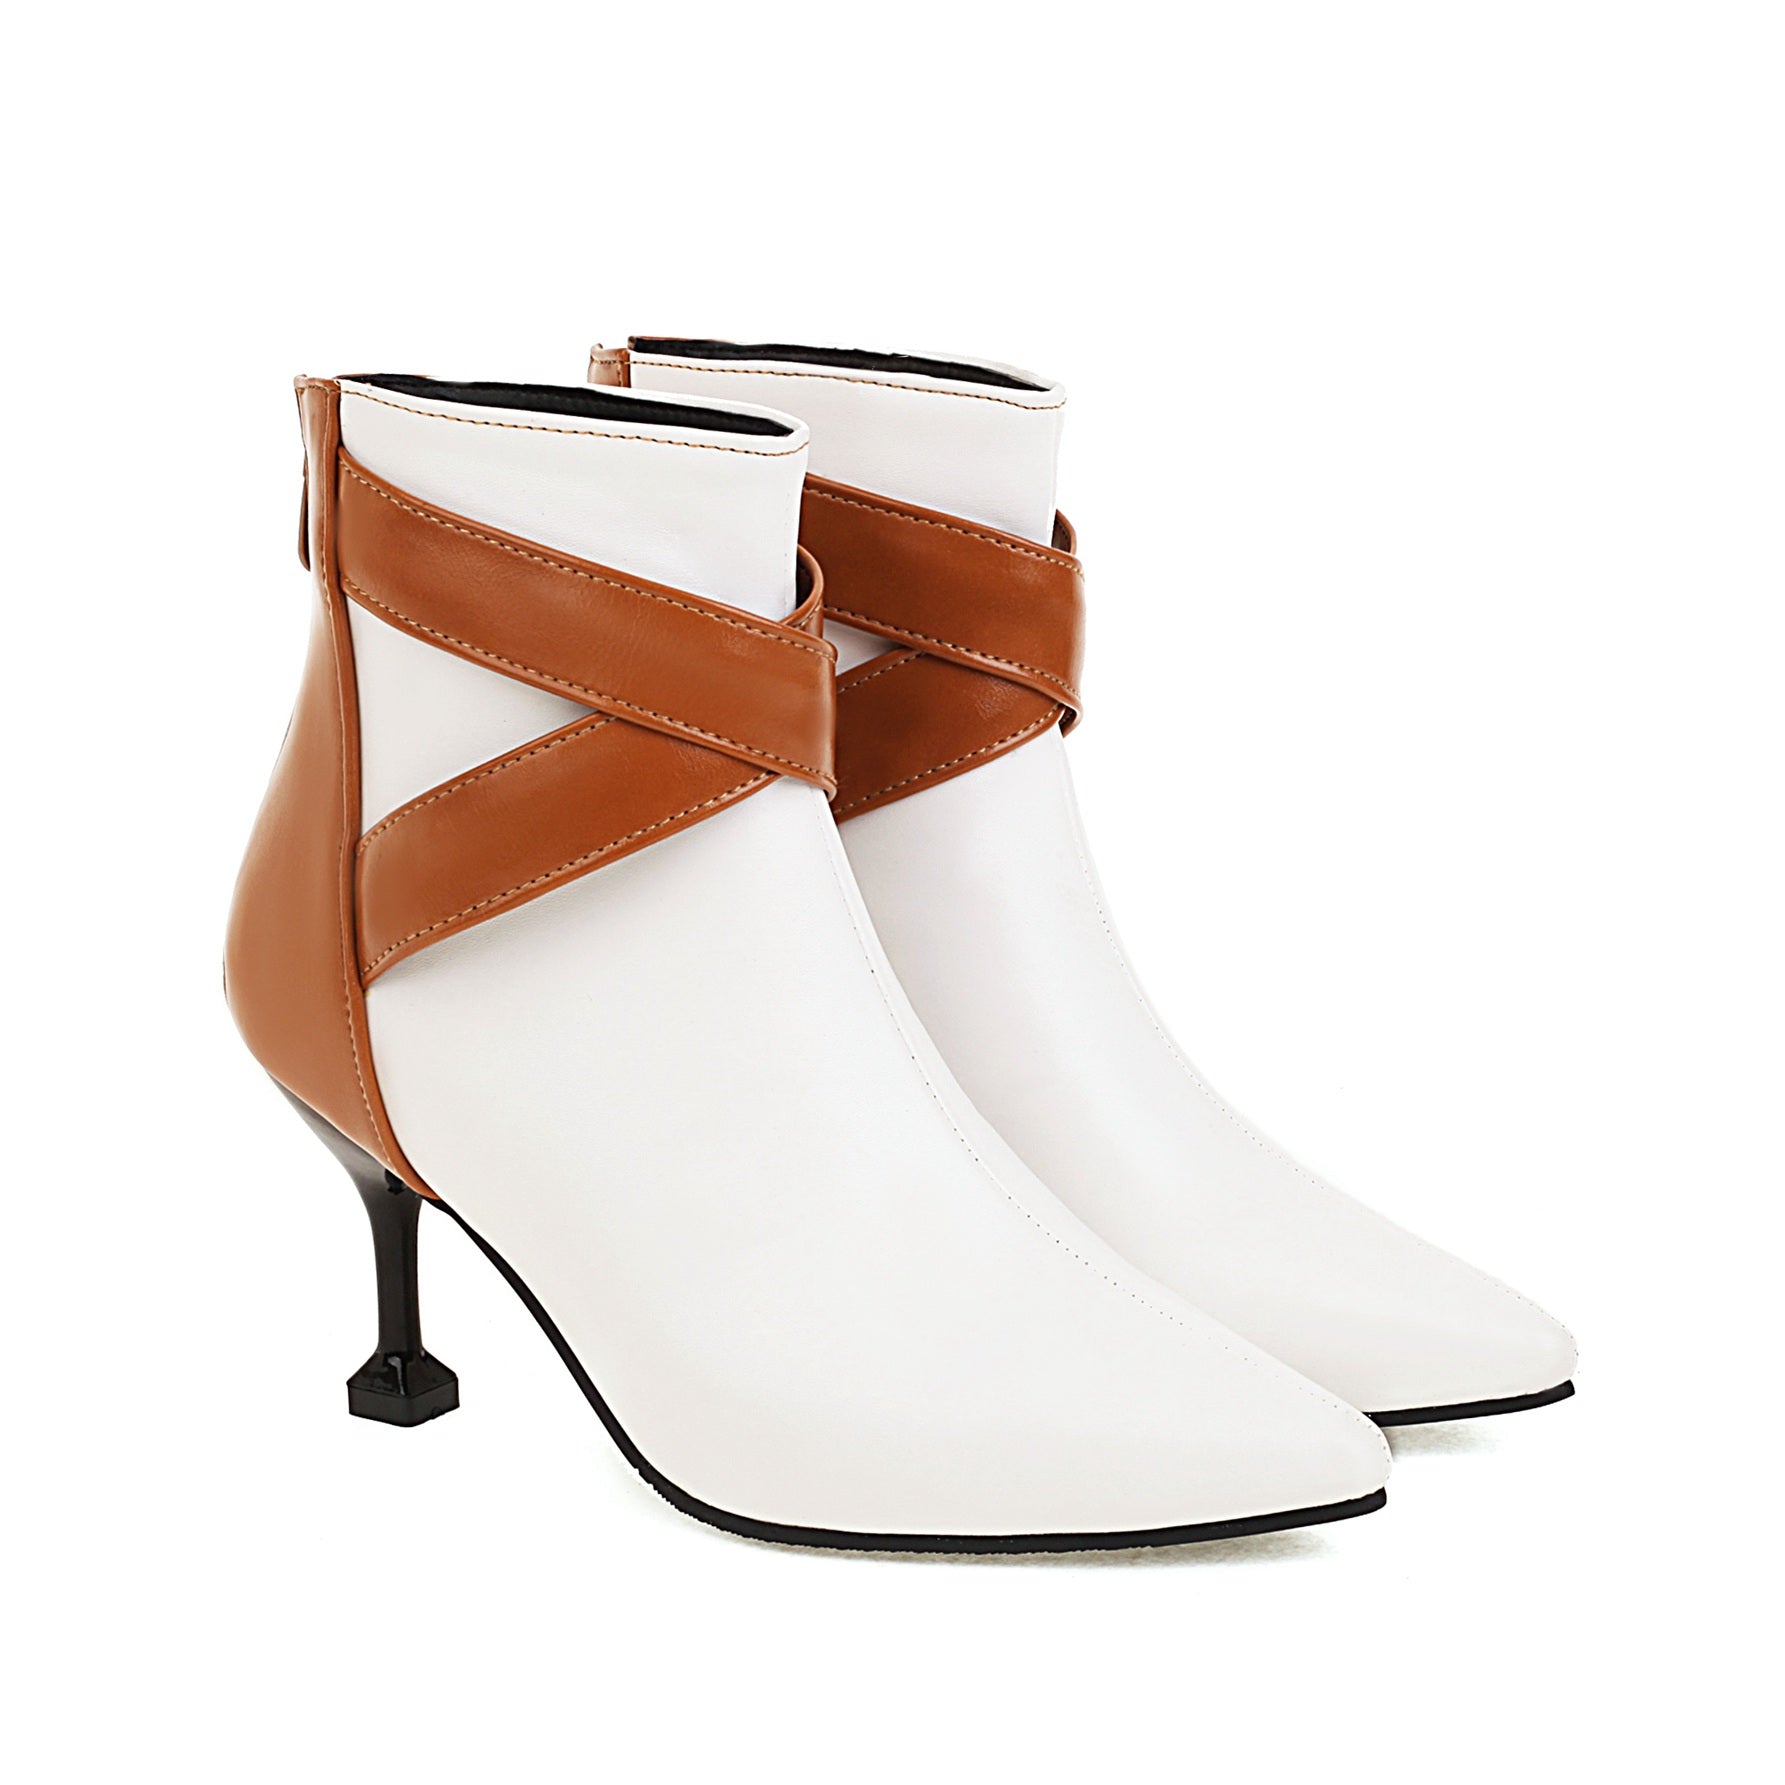 Bigsizeheels Sexy pointy zipper ankle boots - White freeshipping - bigsizeheel®-size5-size15 -All Plus Sizes Available!